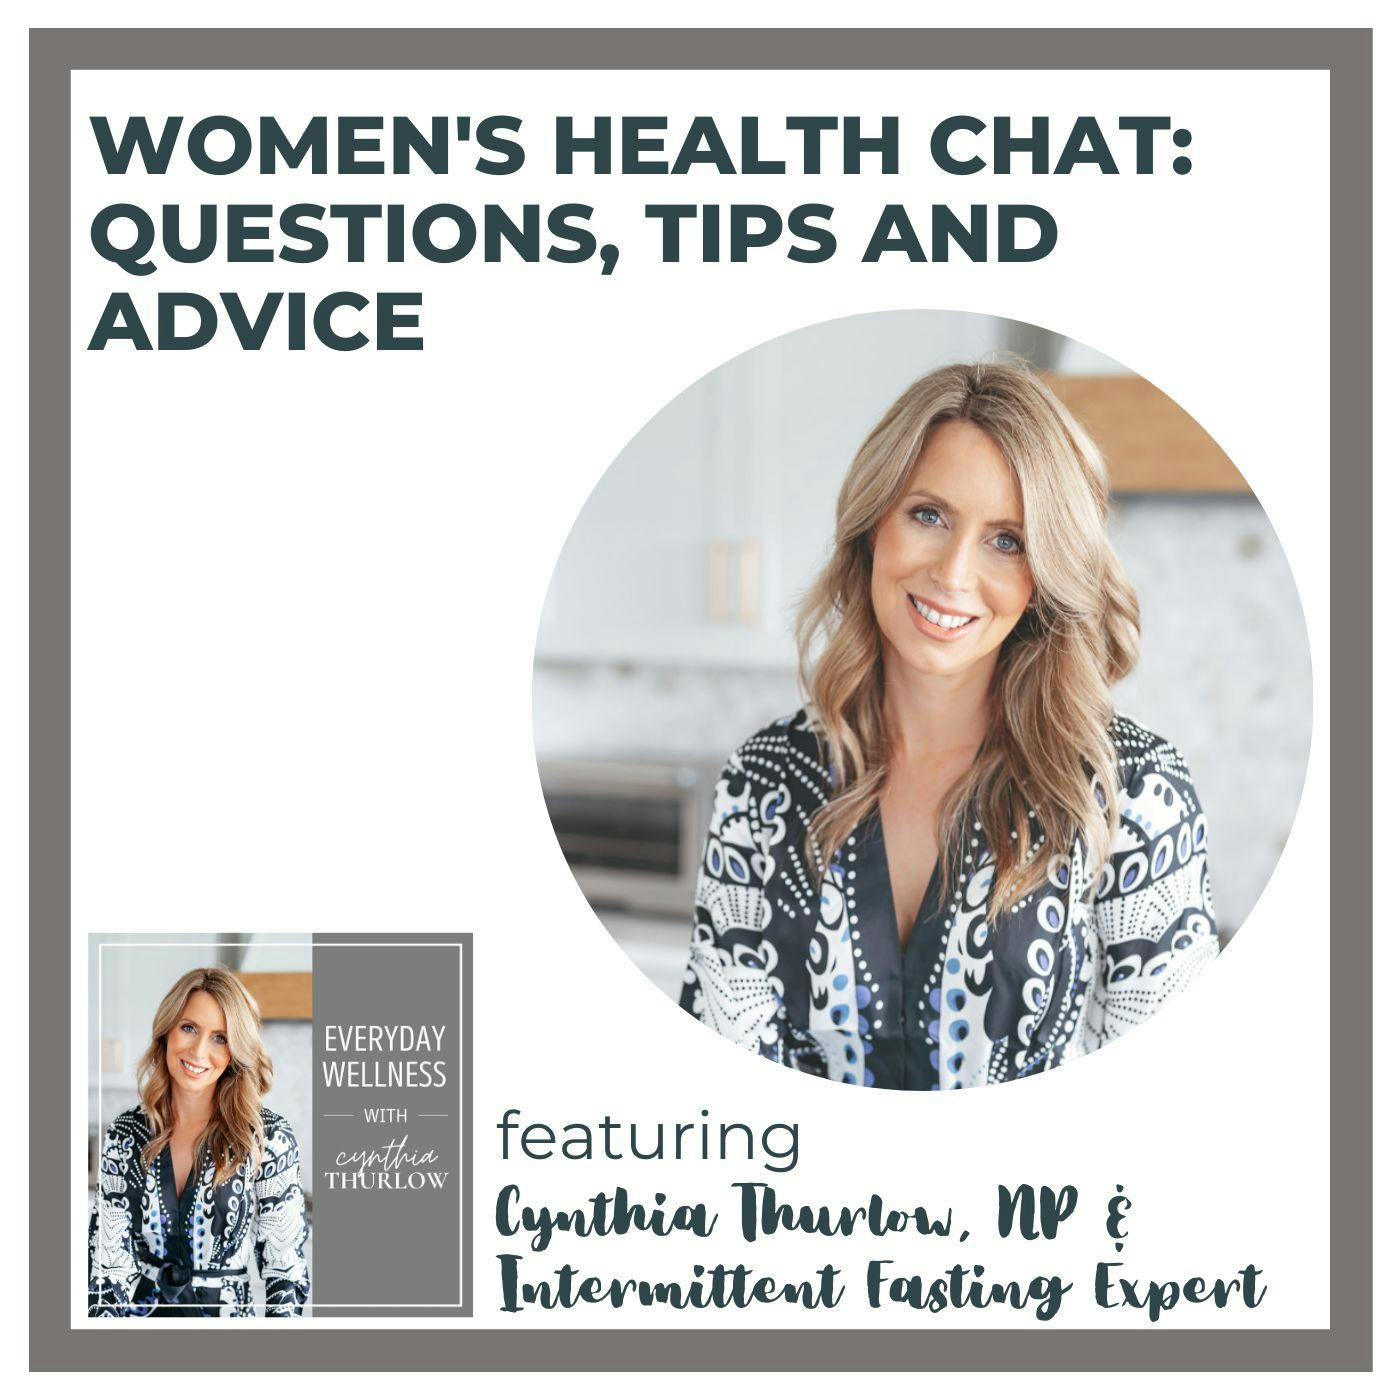 Ep. 298 Women’s Health Chat: Questions, Tips and Advice with Cynthia Thurlow, NP & Intermittent Fasting Expert